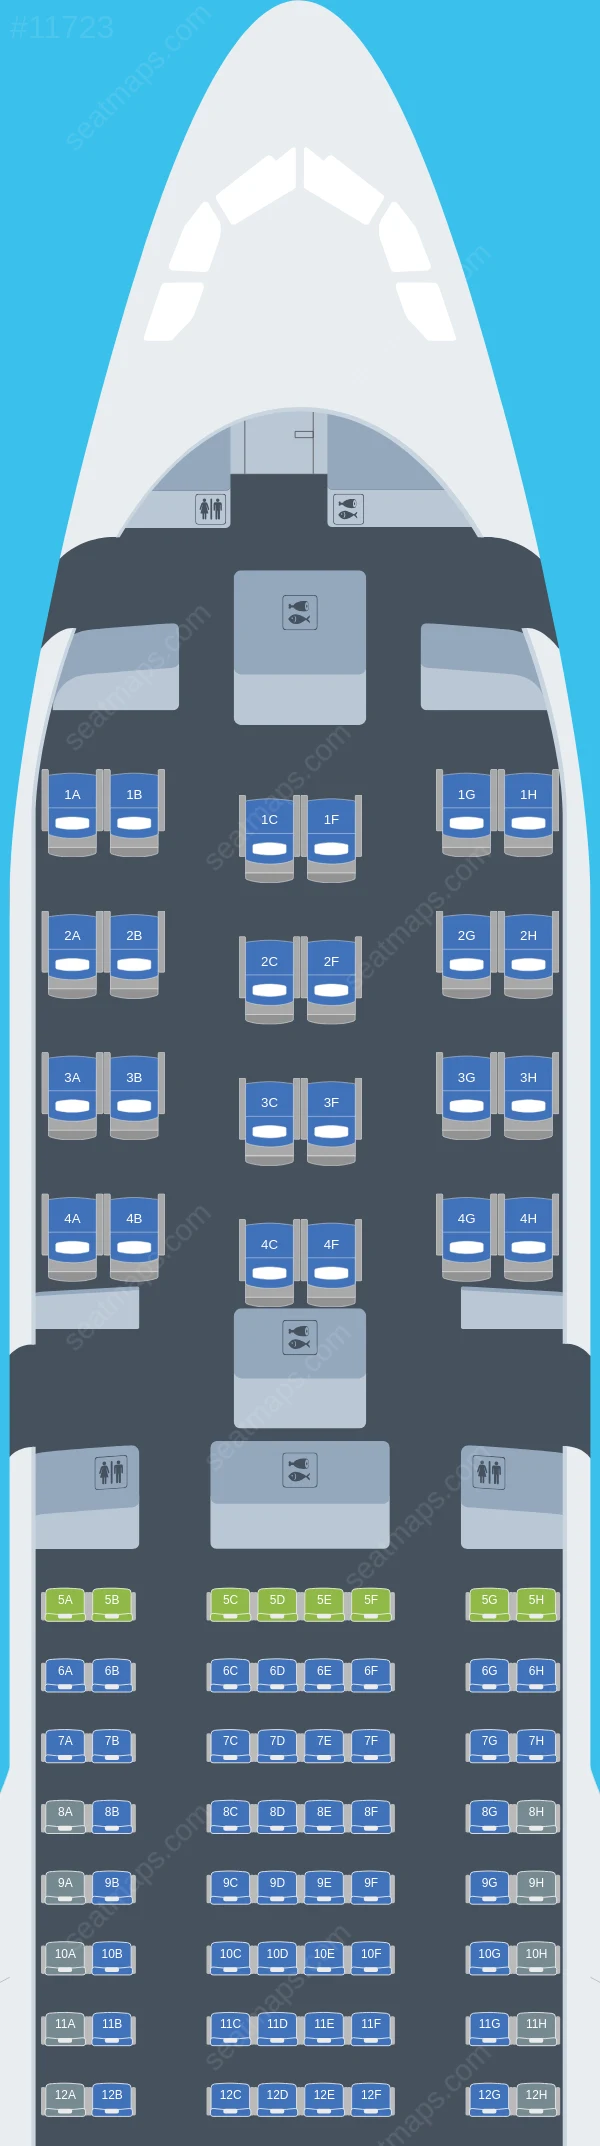 HiSky Europe Airbus A330-200 seatmap preview